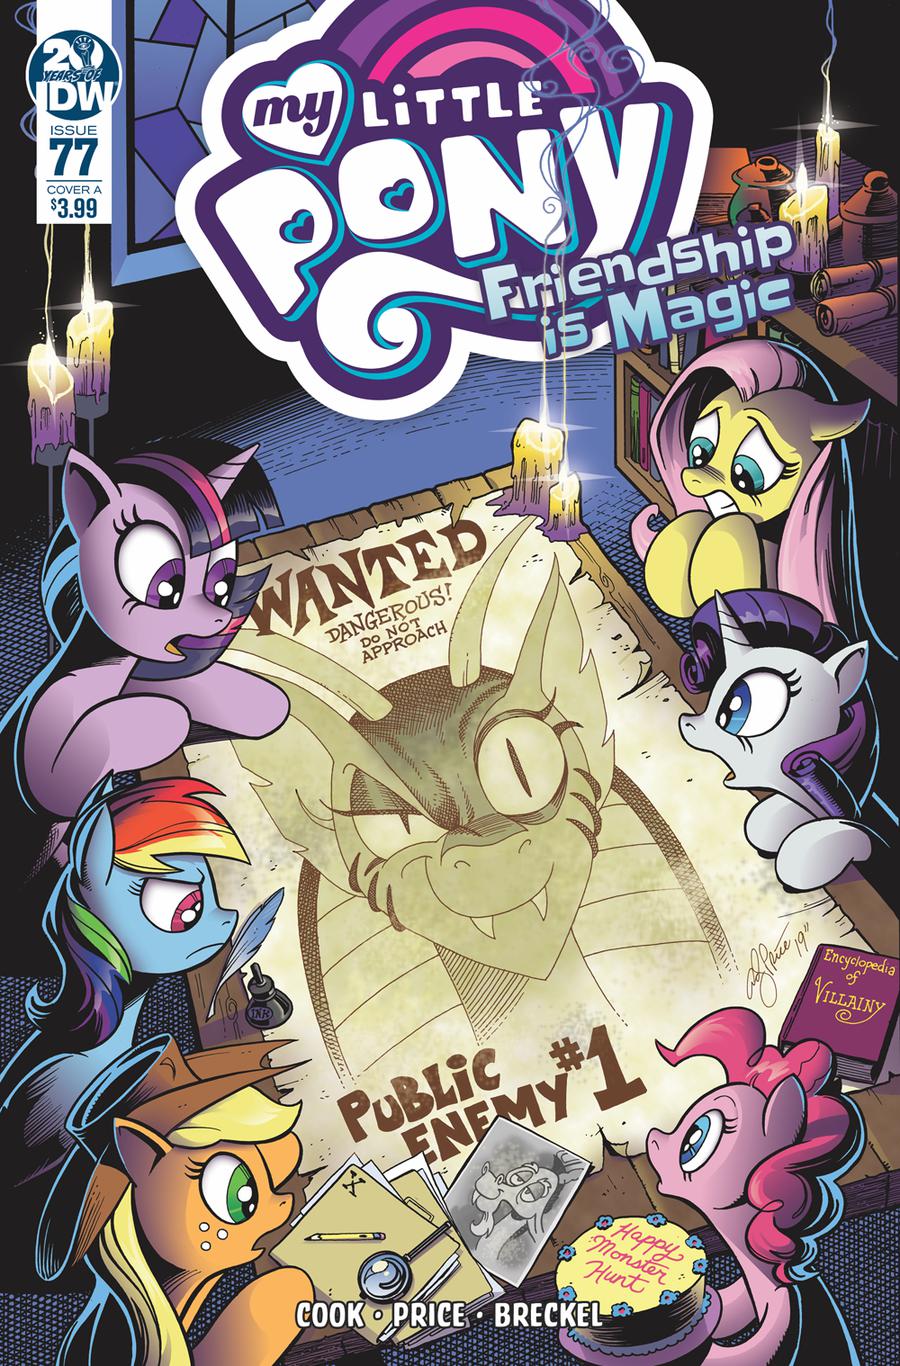 My Little Pony Friendship Is Magic #77 Cover A Regular Andy Price Cover